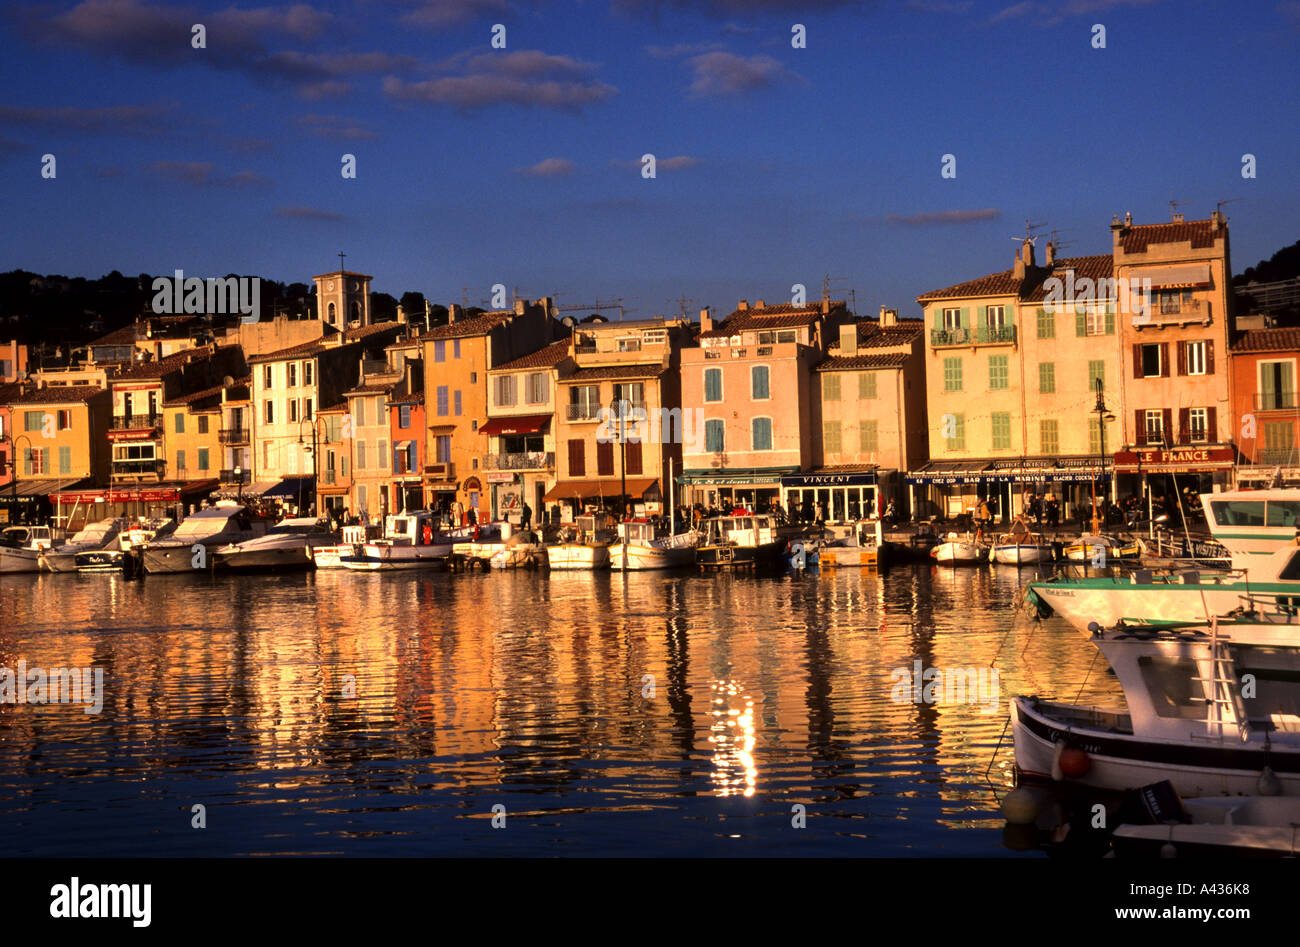 Cassis Old Vieux Port Harbor  Provence French Riviera Cote D'Azur France  Mediterranean Stock Photo